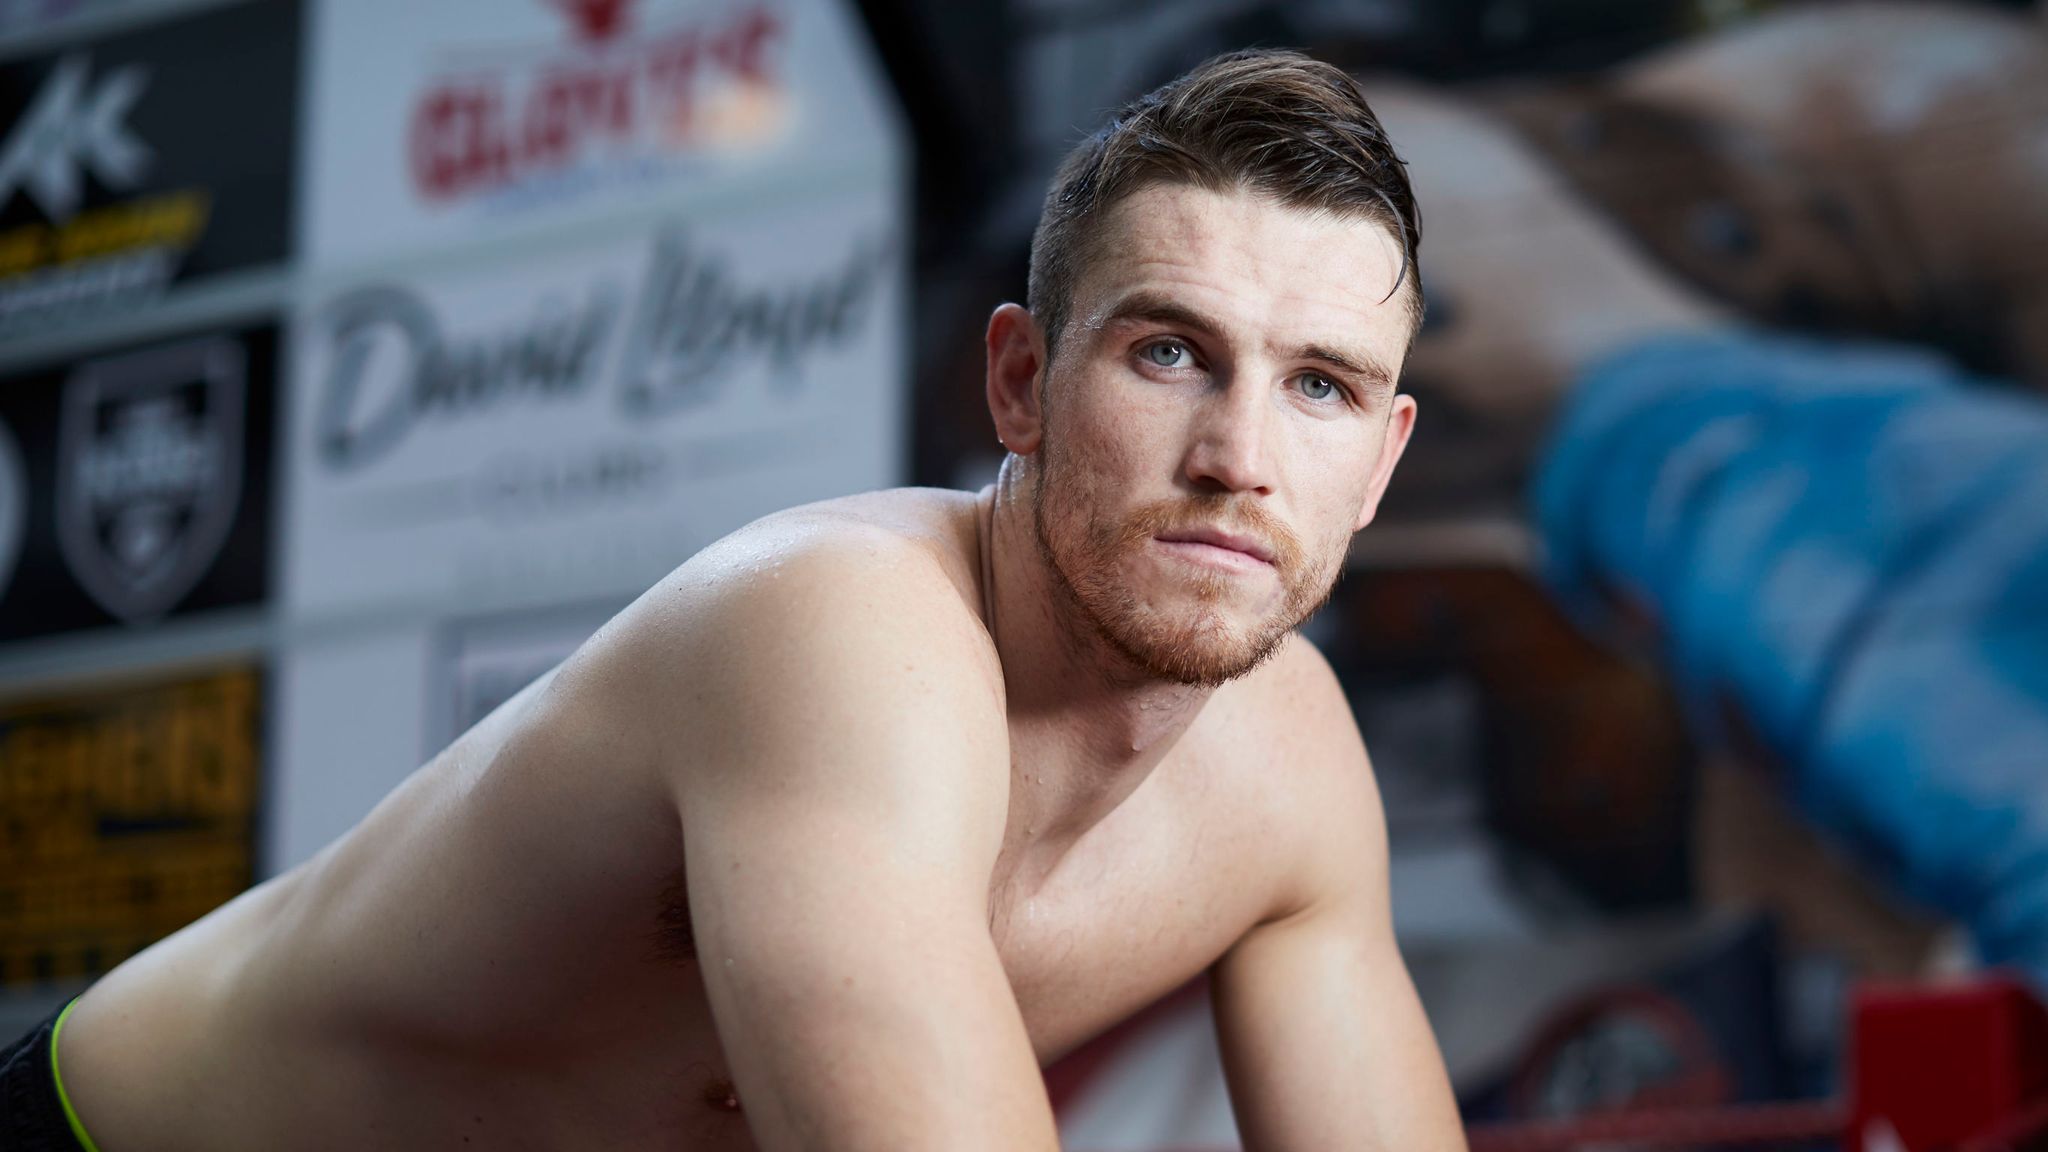 Callum Smith hopes to produce knockout win over Juergen Braehmer this